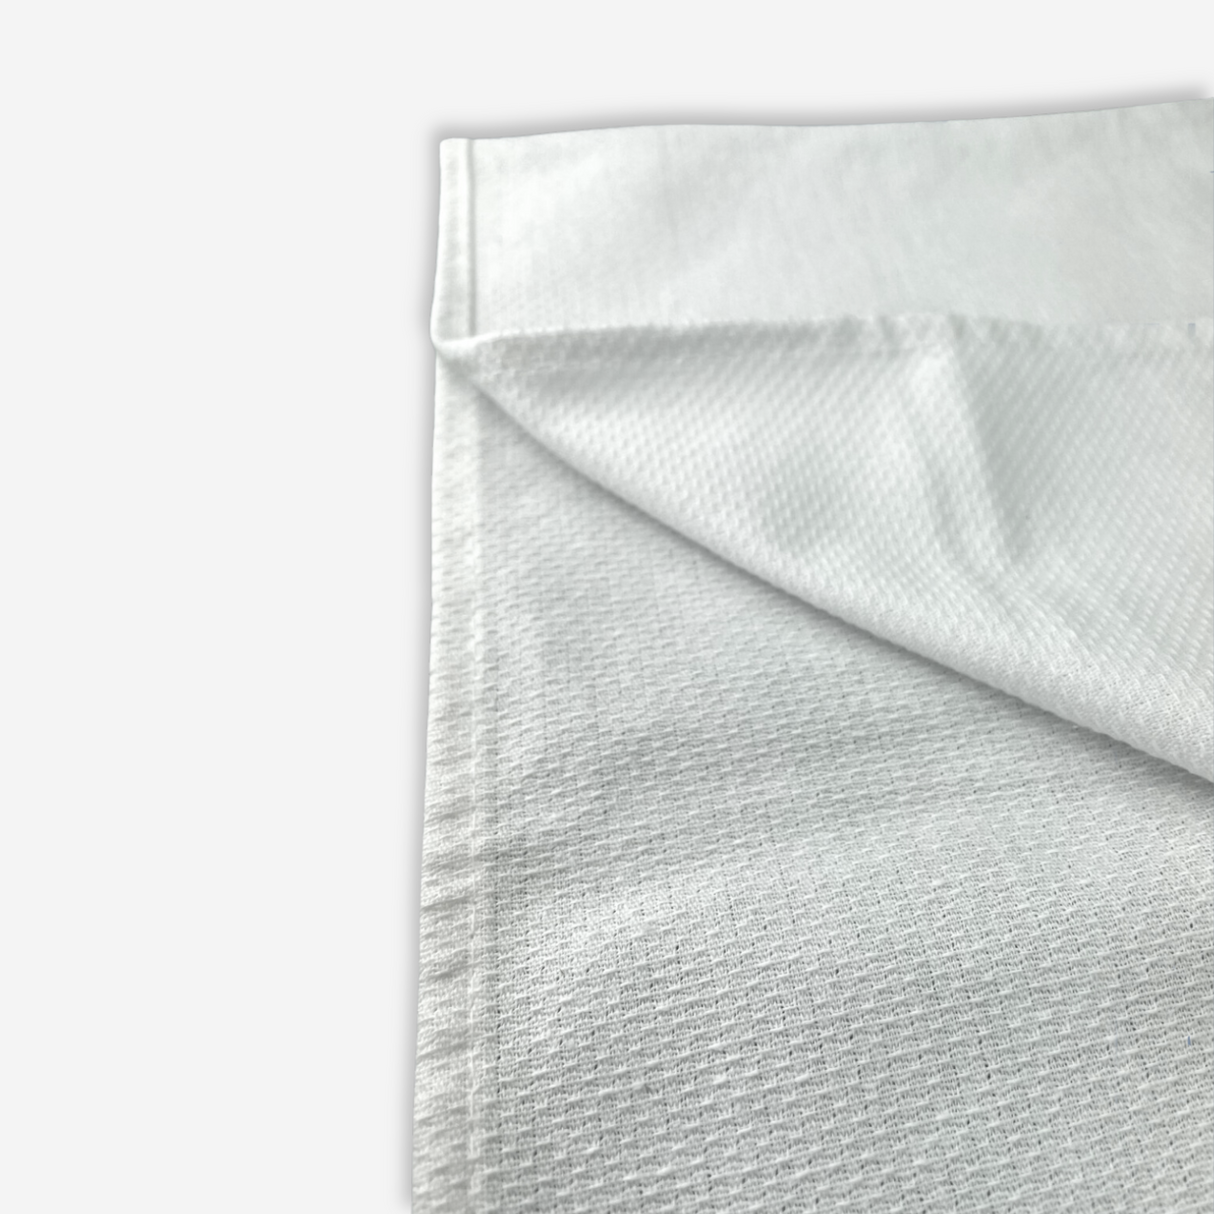 Close up view on a white tuck towel folded.